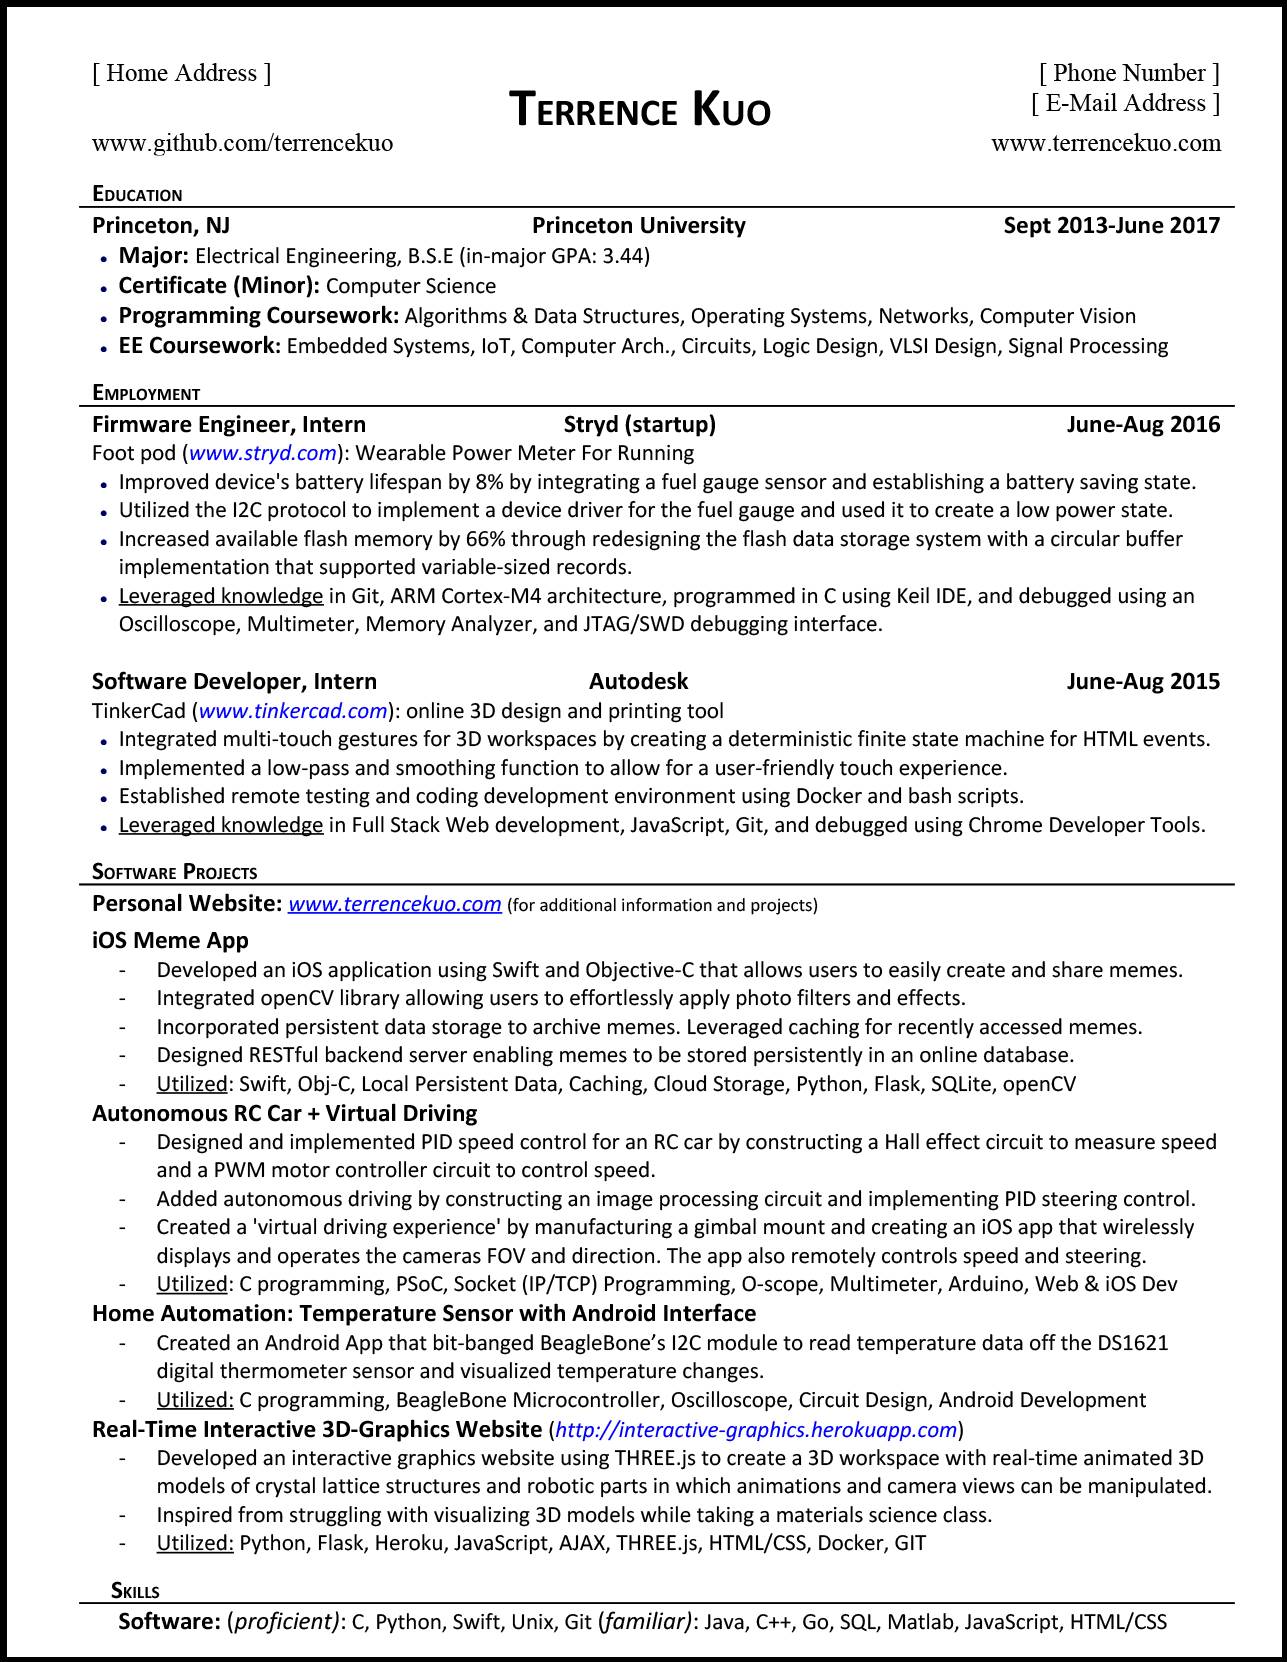 How To Write A Killer Software Engineering Resume